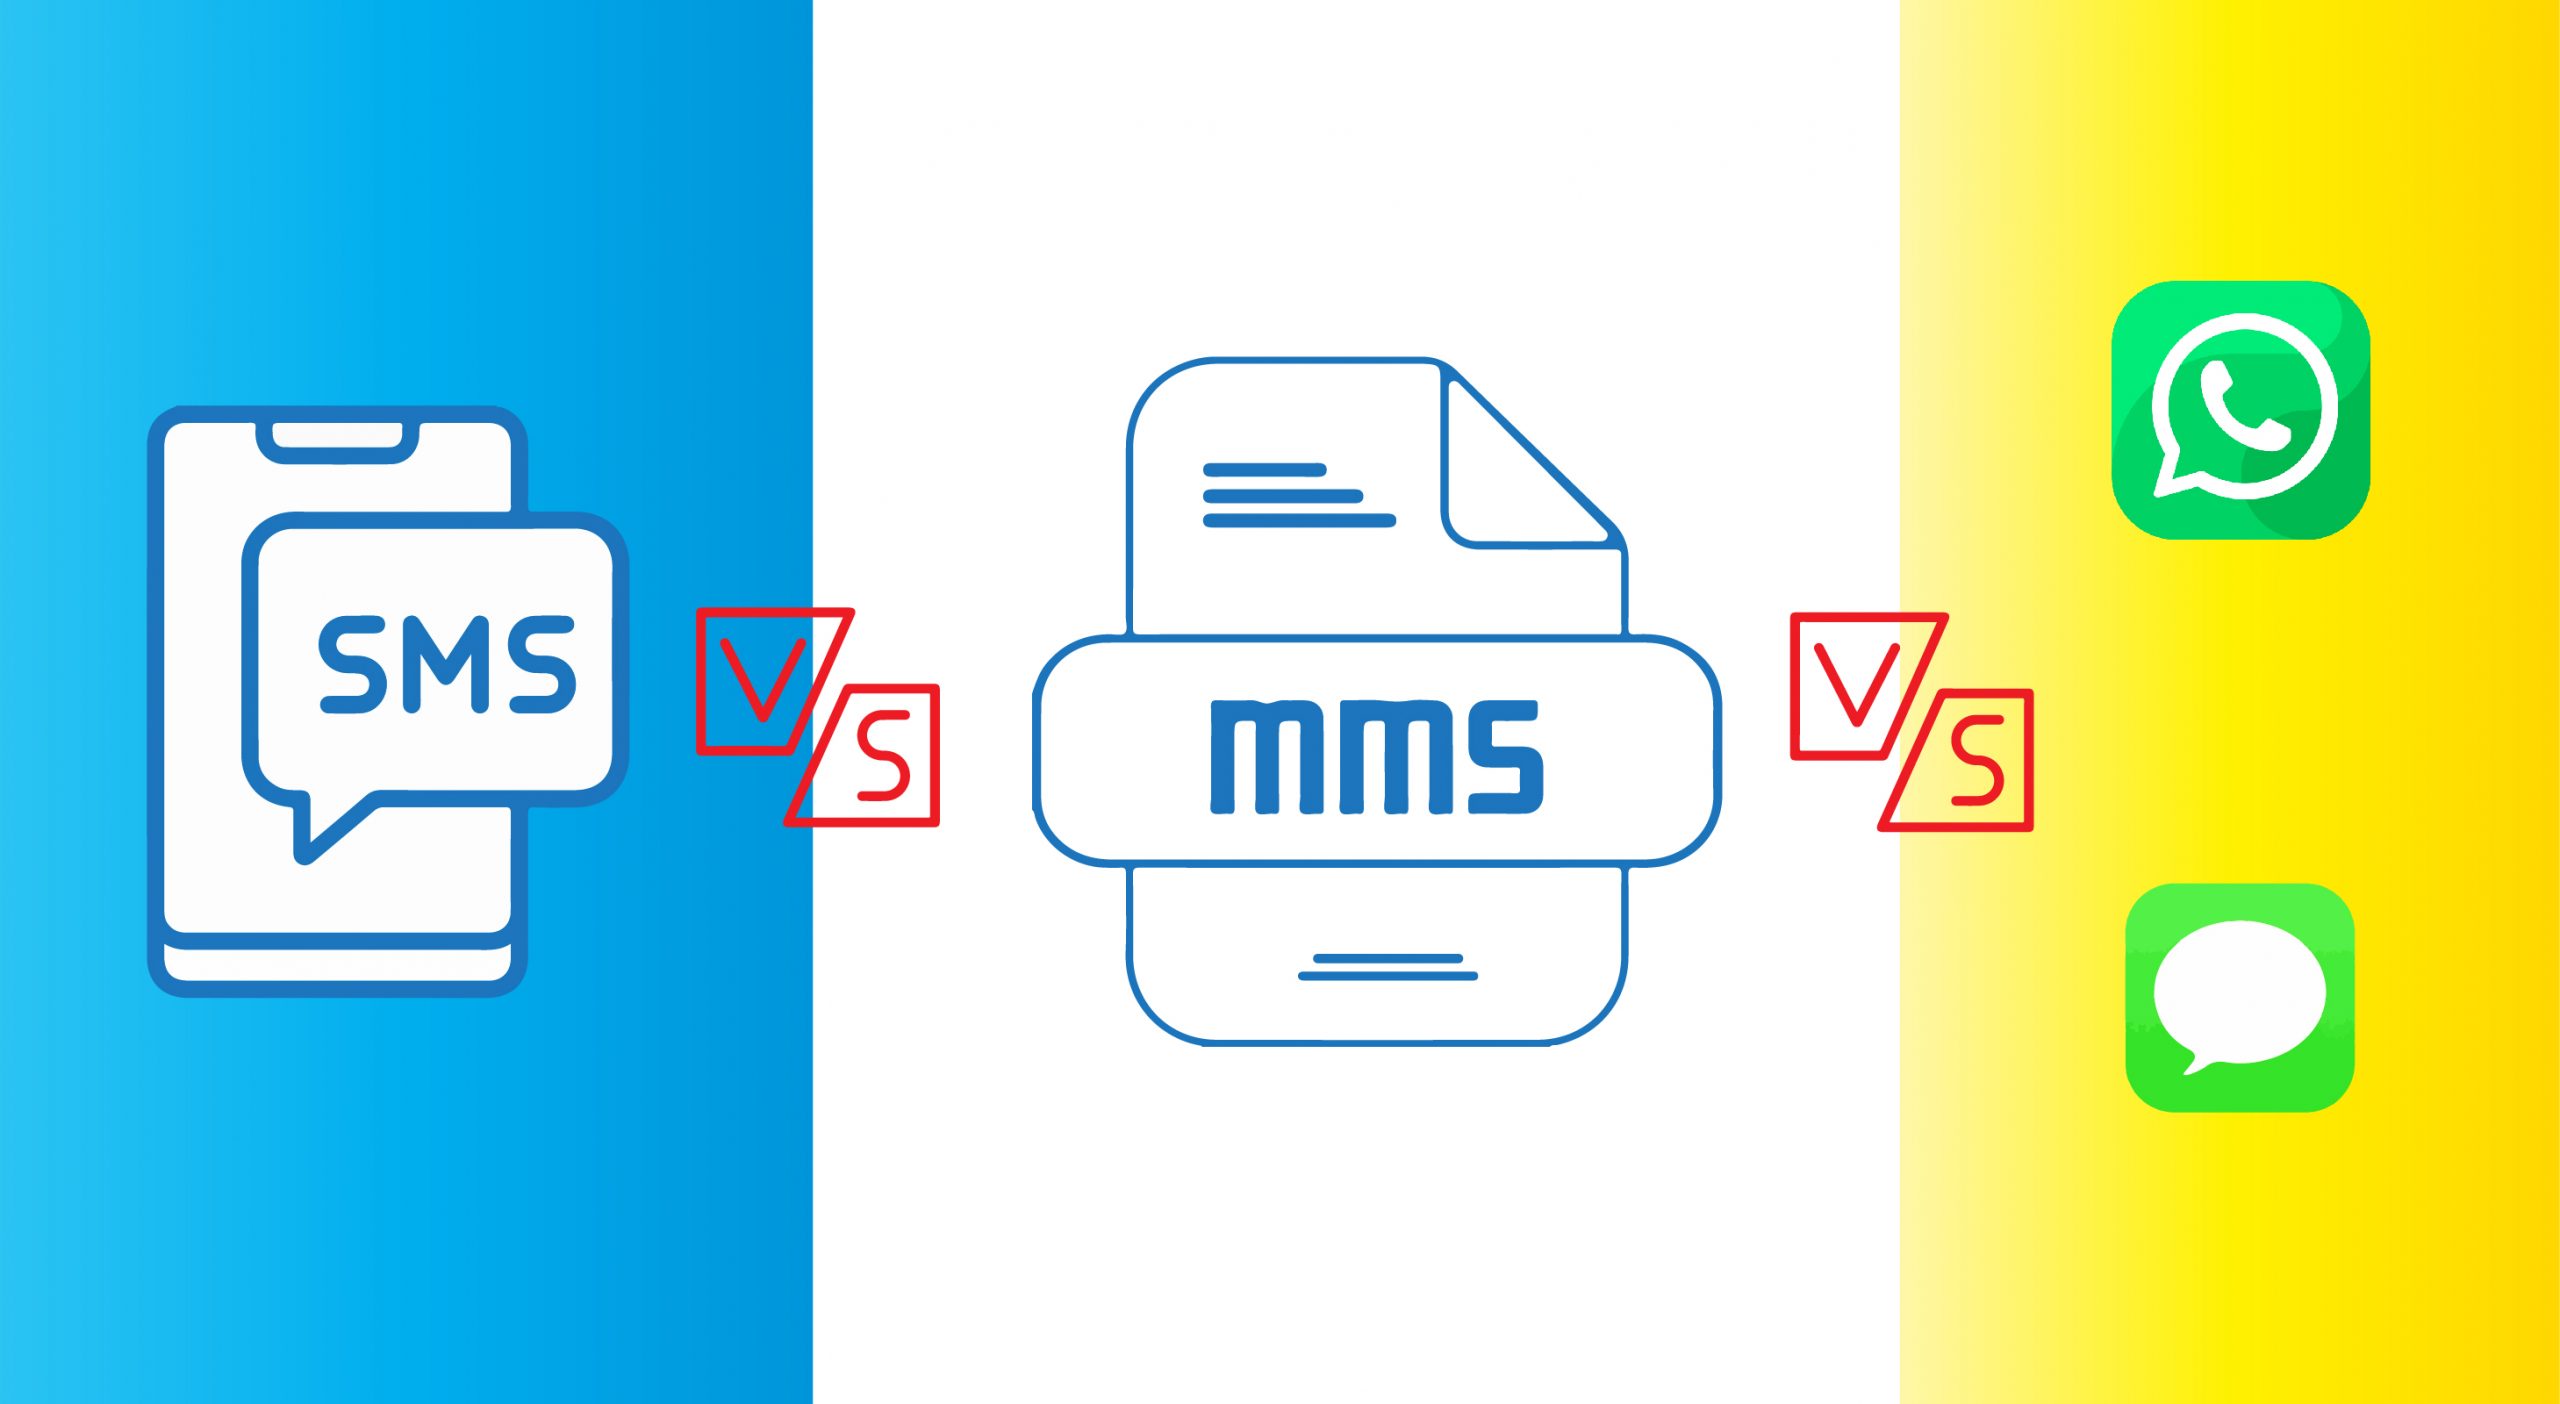 SMS vs MMS & How They Differ From iMessage, WhatsApp, Etc.